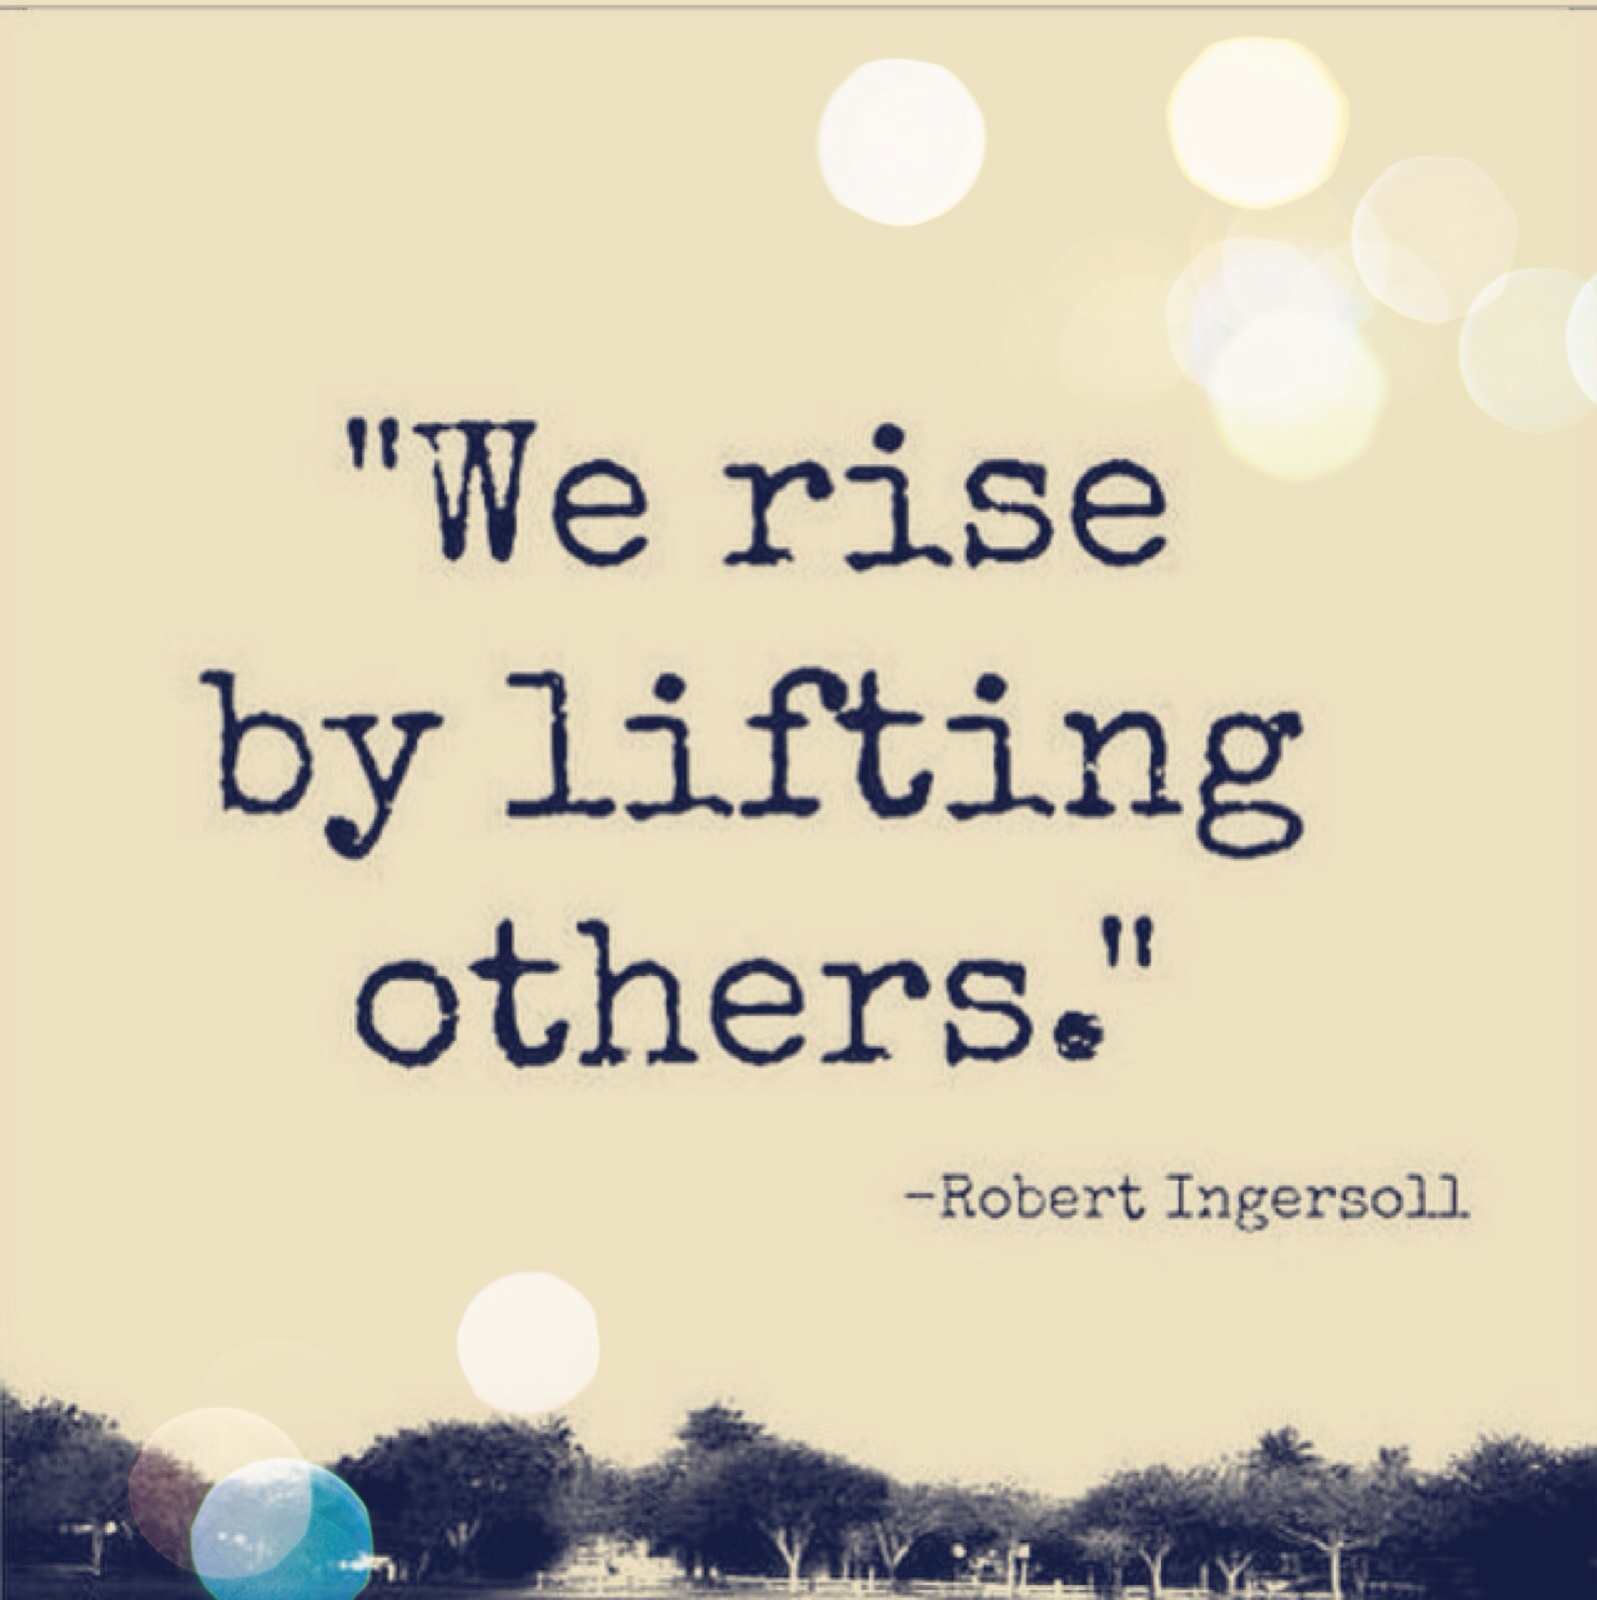 we rise by lifting others. robert ingersoll